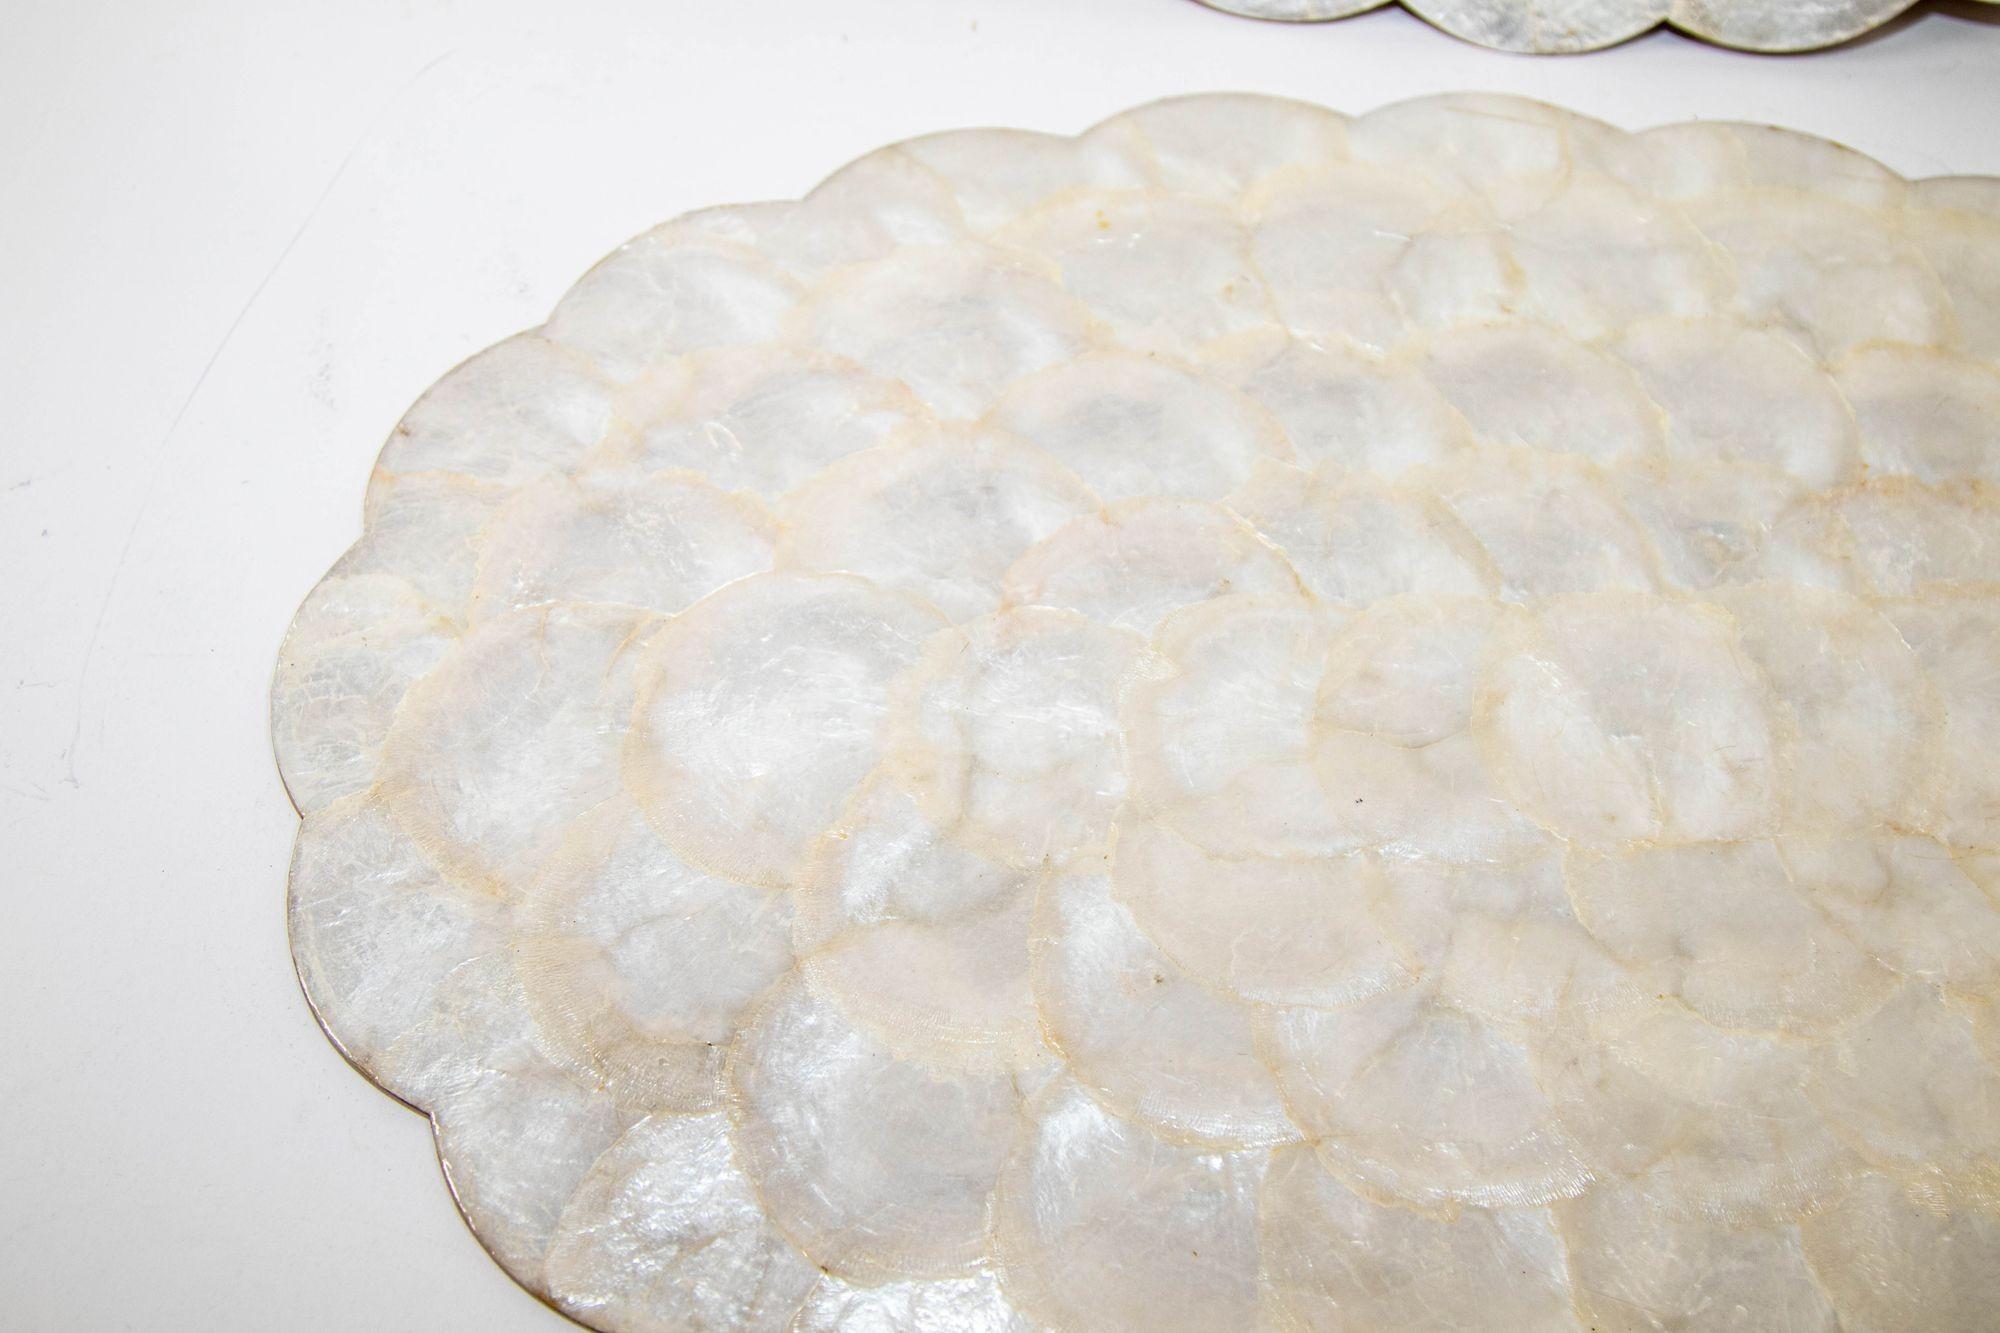 Organic Modern Vintage Hallie St Mary 2 Placemats in Natural Capiz Pearl Shell Scalloped Edge